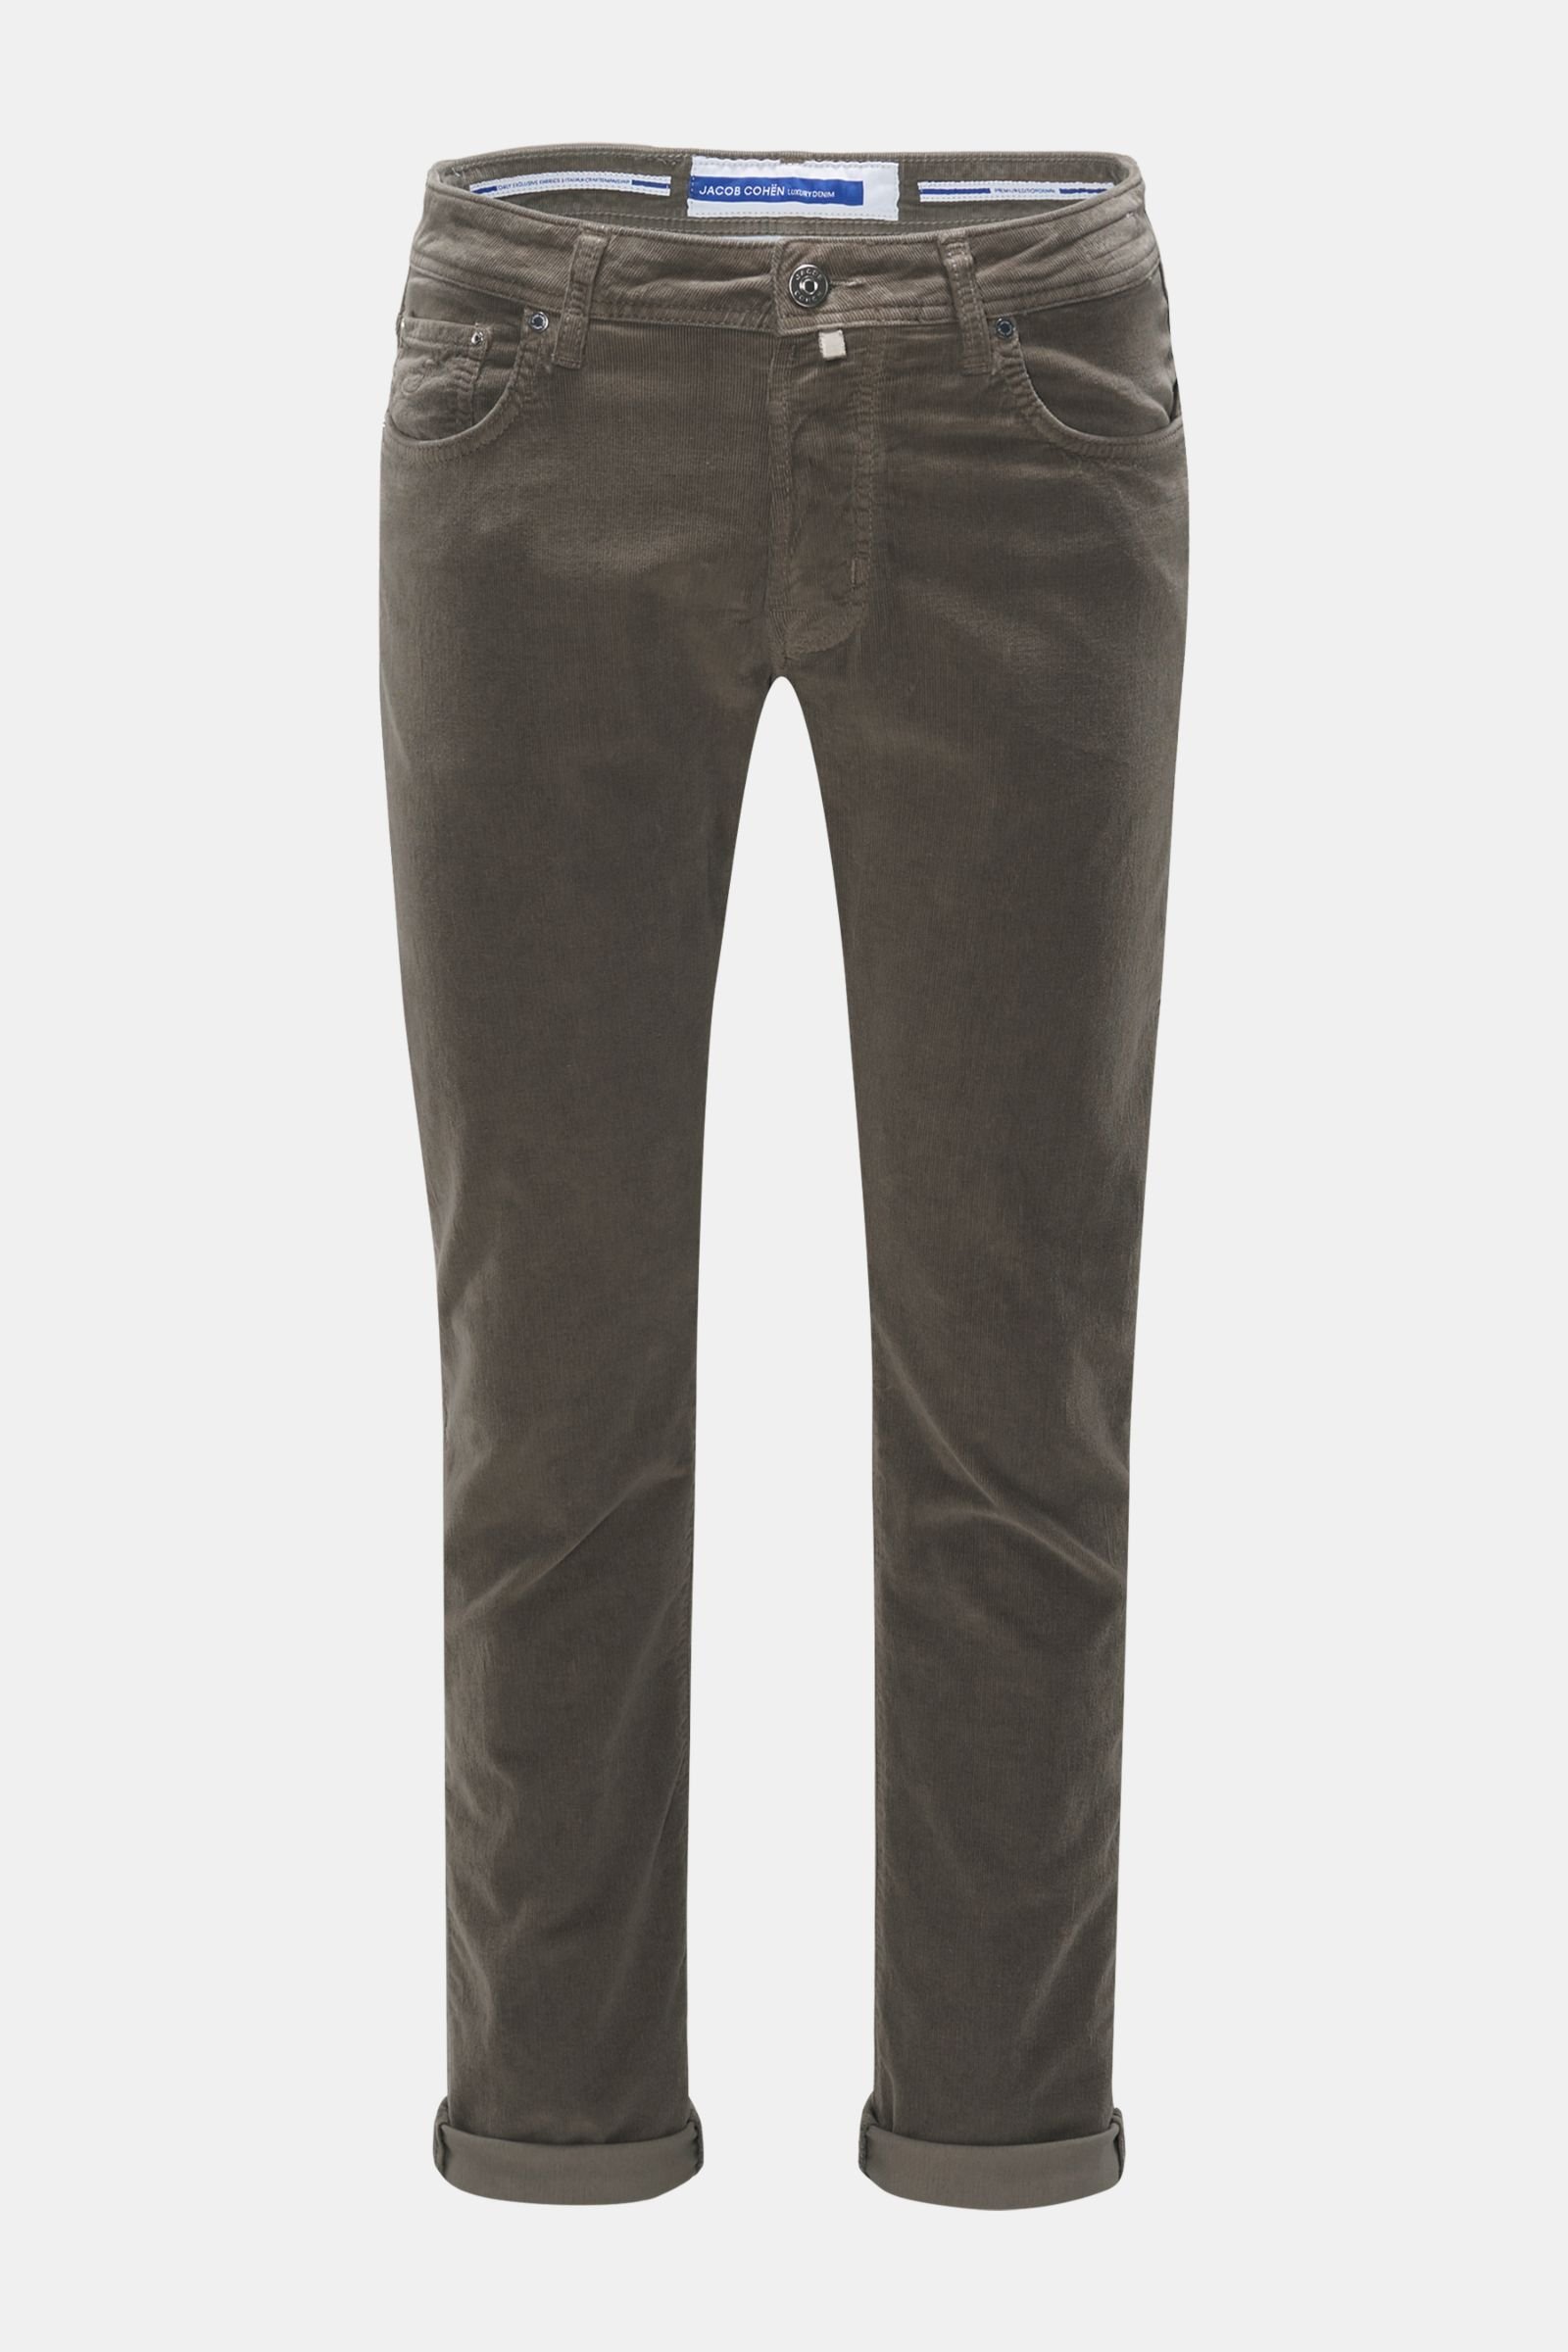 Corduroy trousers 'Bard' grey-brown (formerly J688)